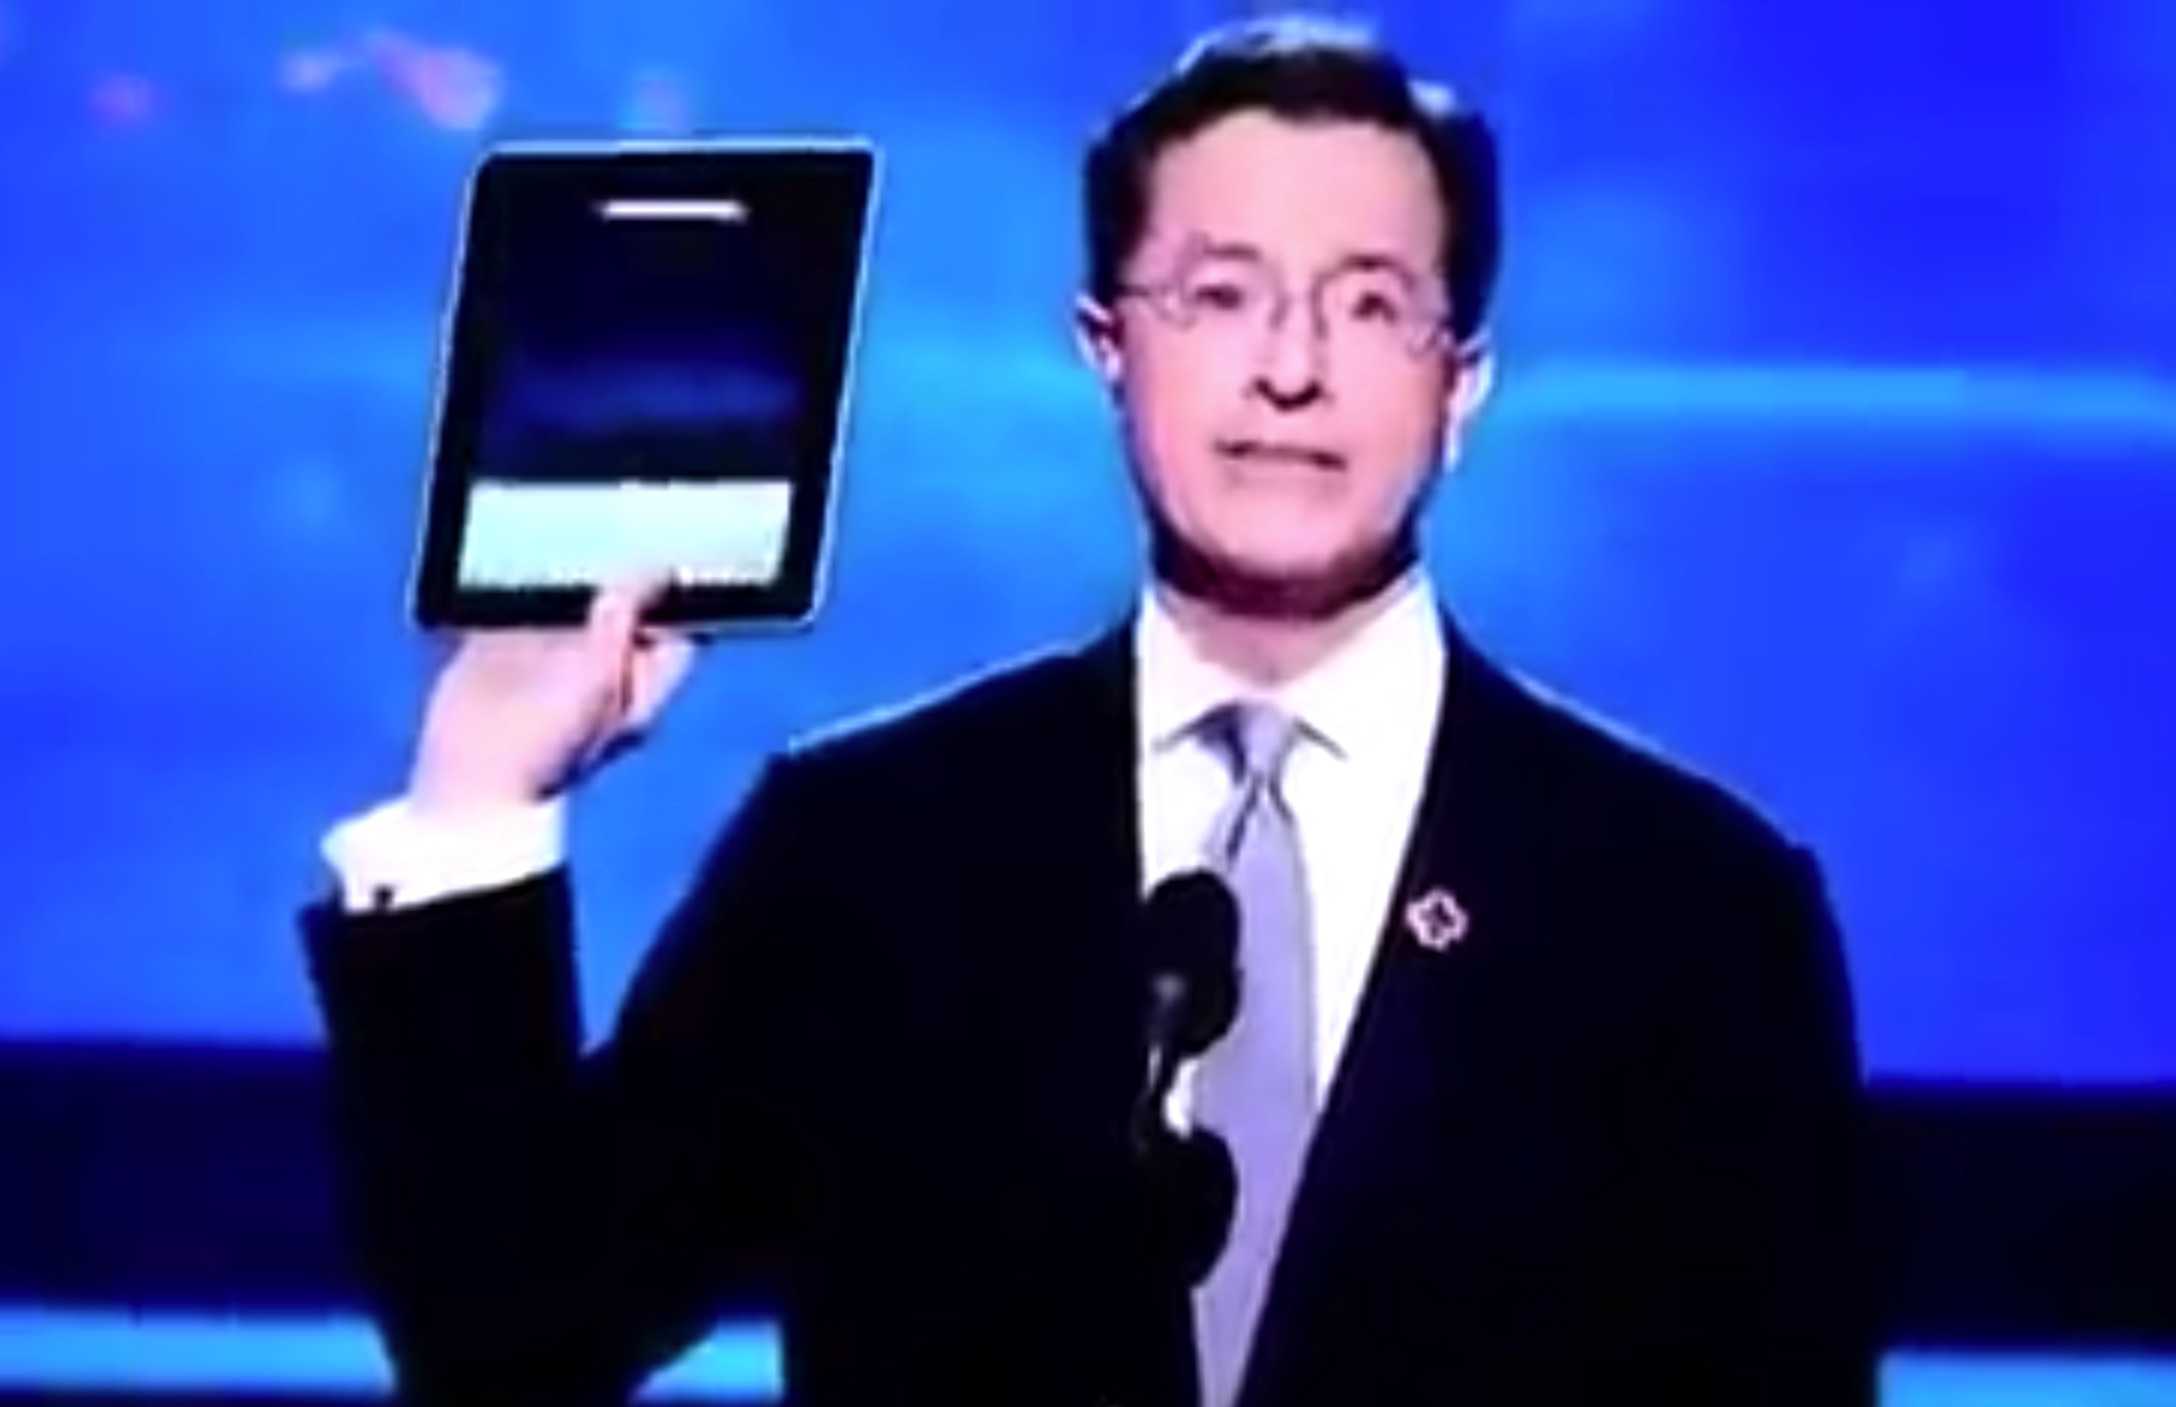 Stephen Colbert shows off a prerelease iPad during the Grammy Awards show.